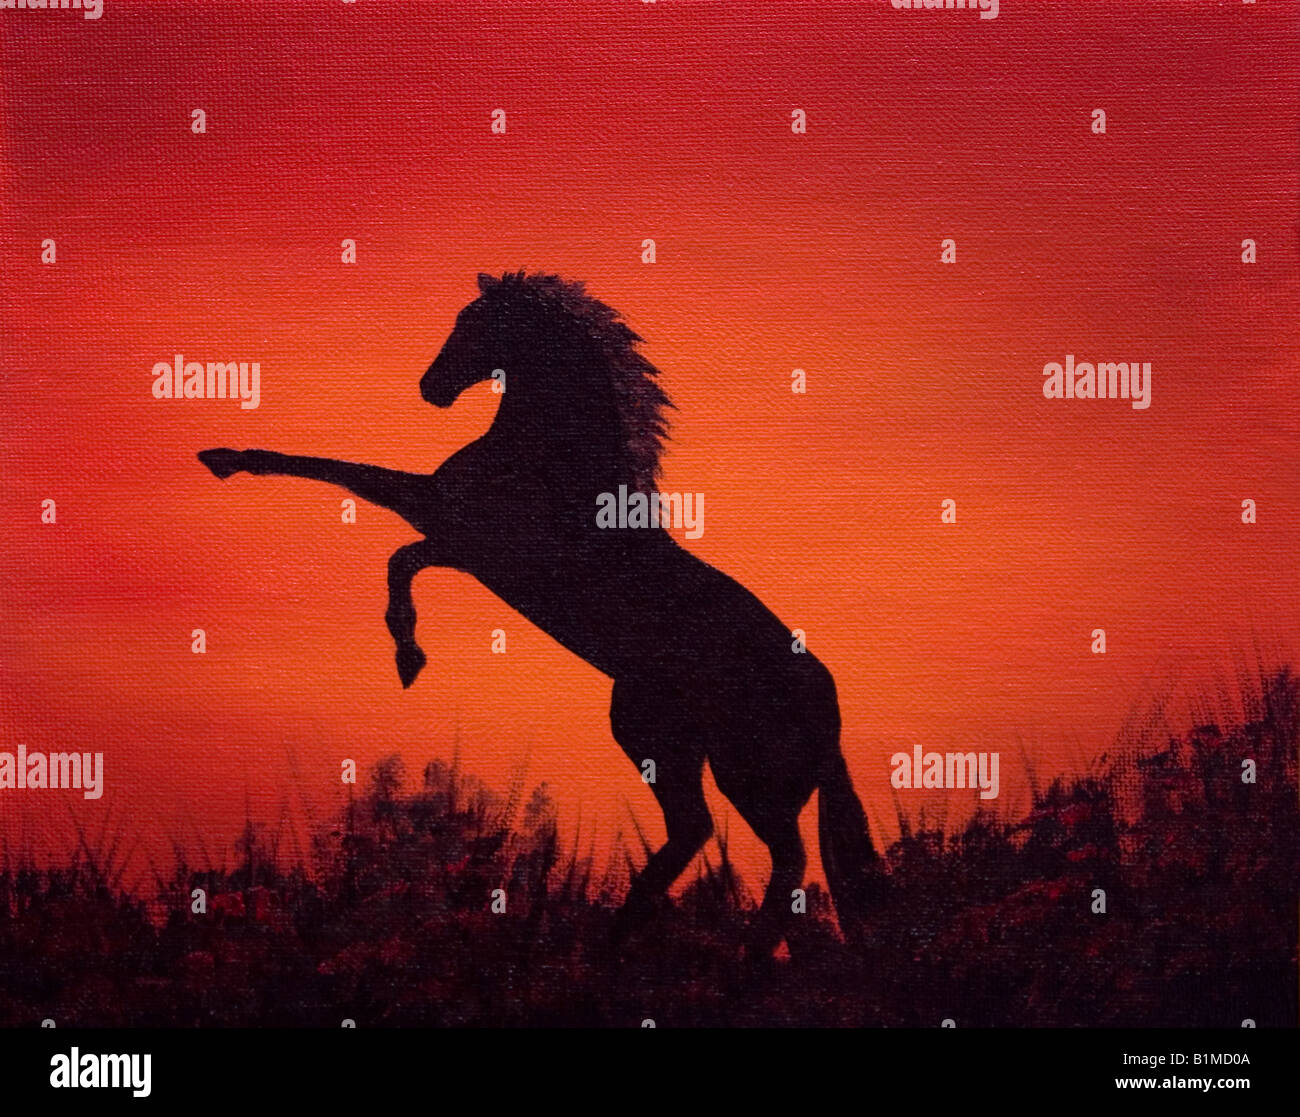 Artwork of a rearing horse silhouette on canvas Stock Photo